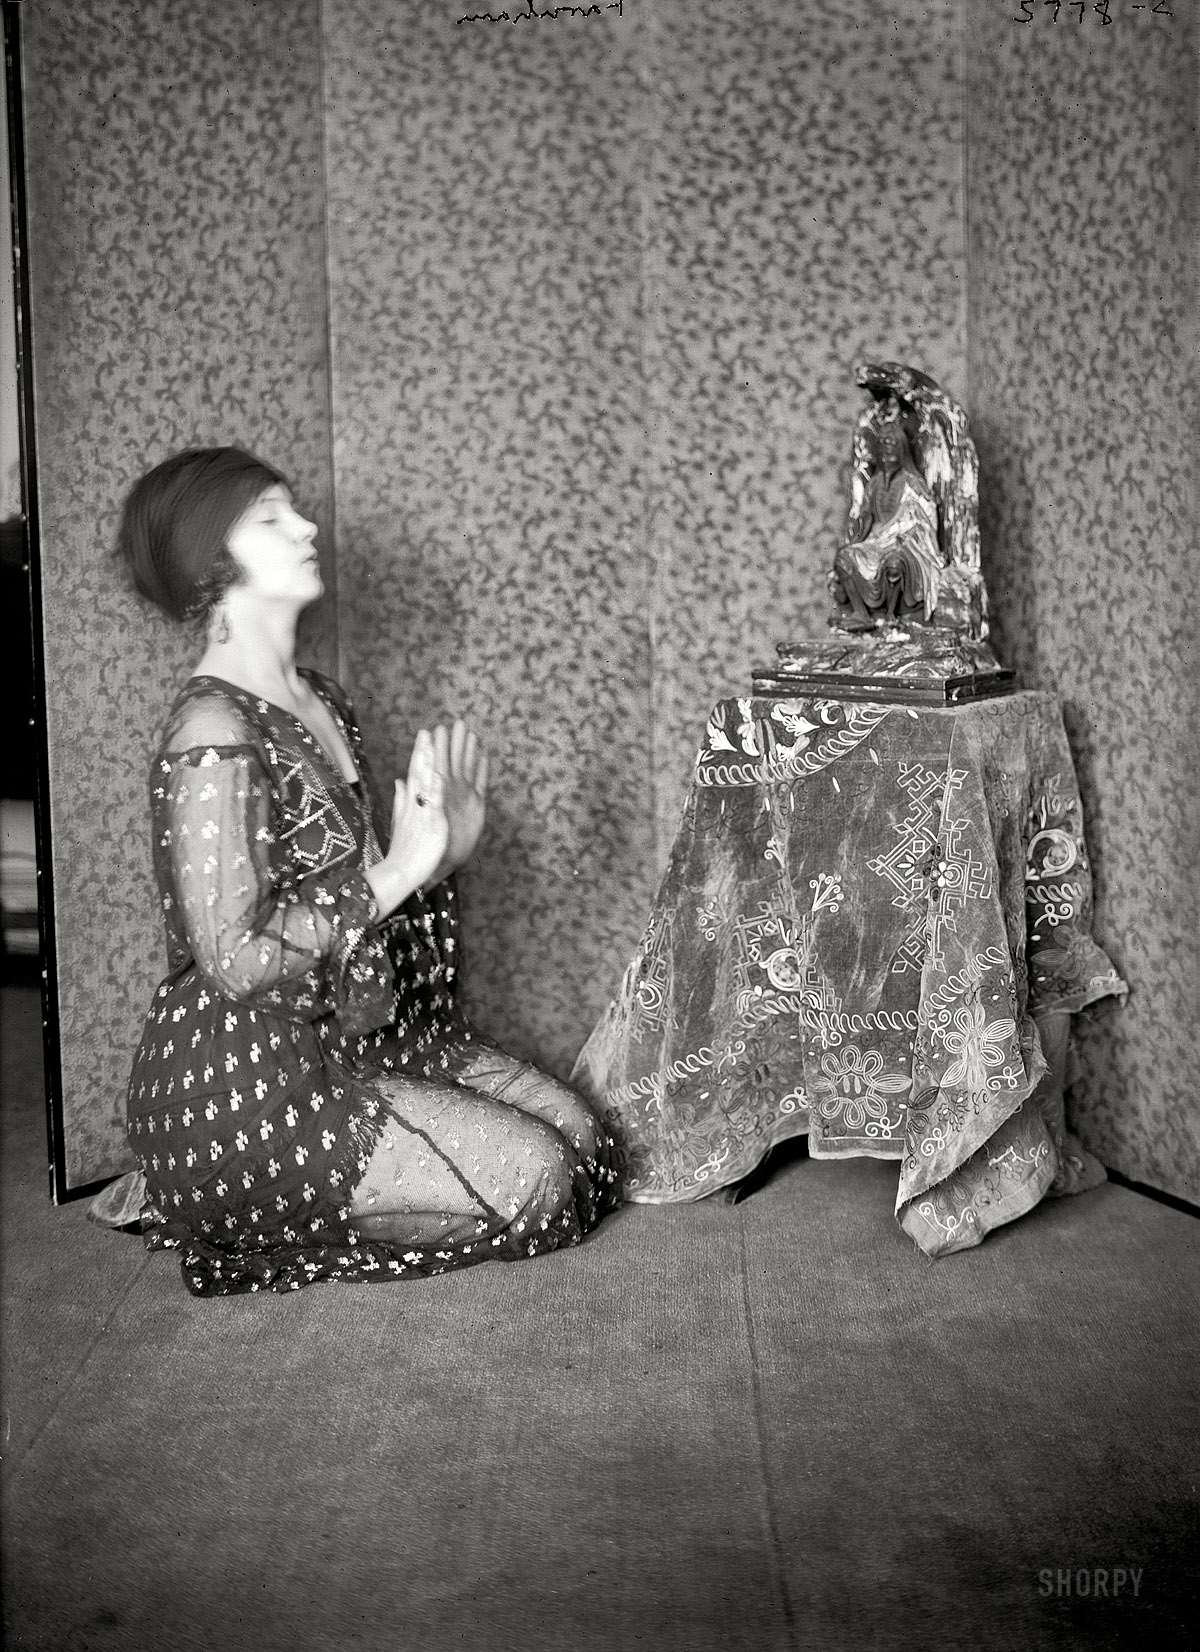 New York circa 1922. "Farraham worshiping." Five photos of this artsy looking lady bear a name that might also be transcribed as Farnham or Fanshaw. Who will be the first to identify her? George Grantham Bain Collection. View full size.